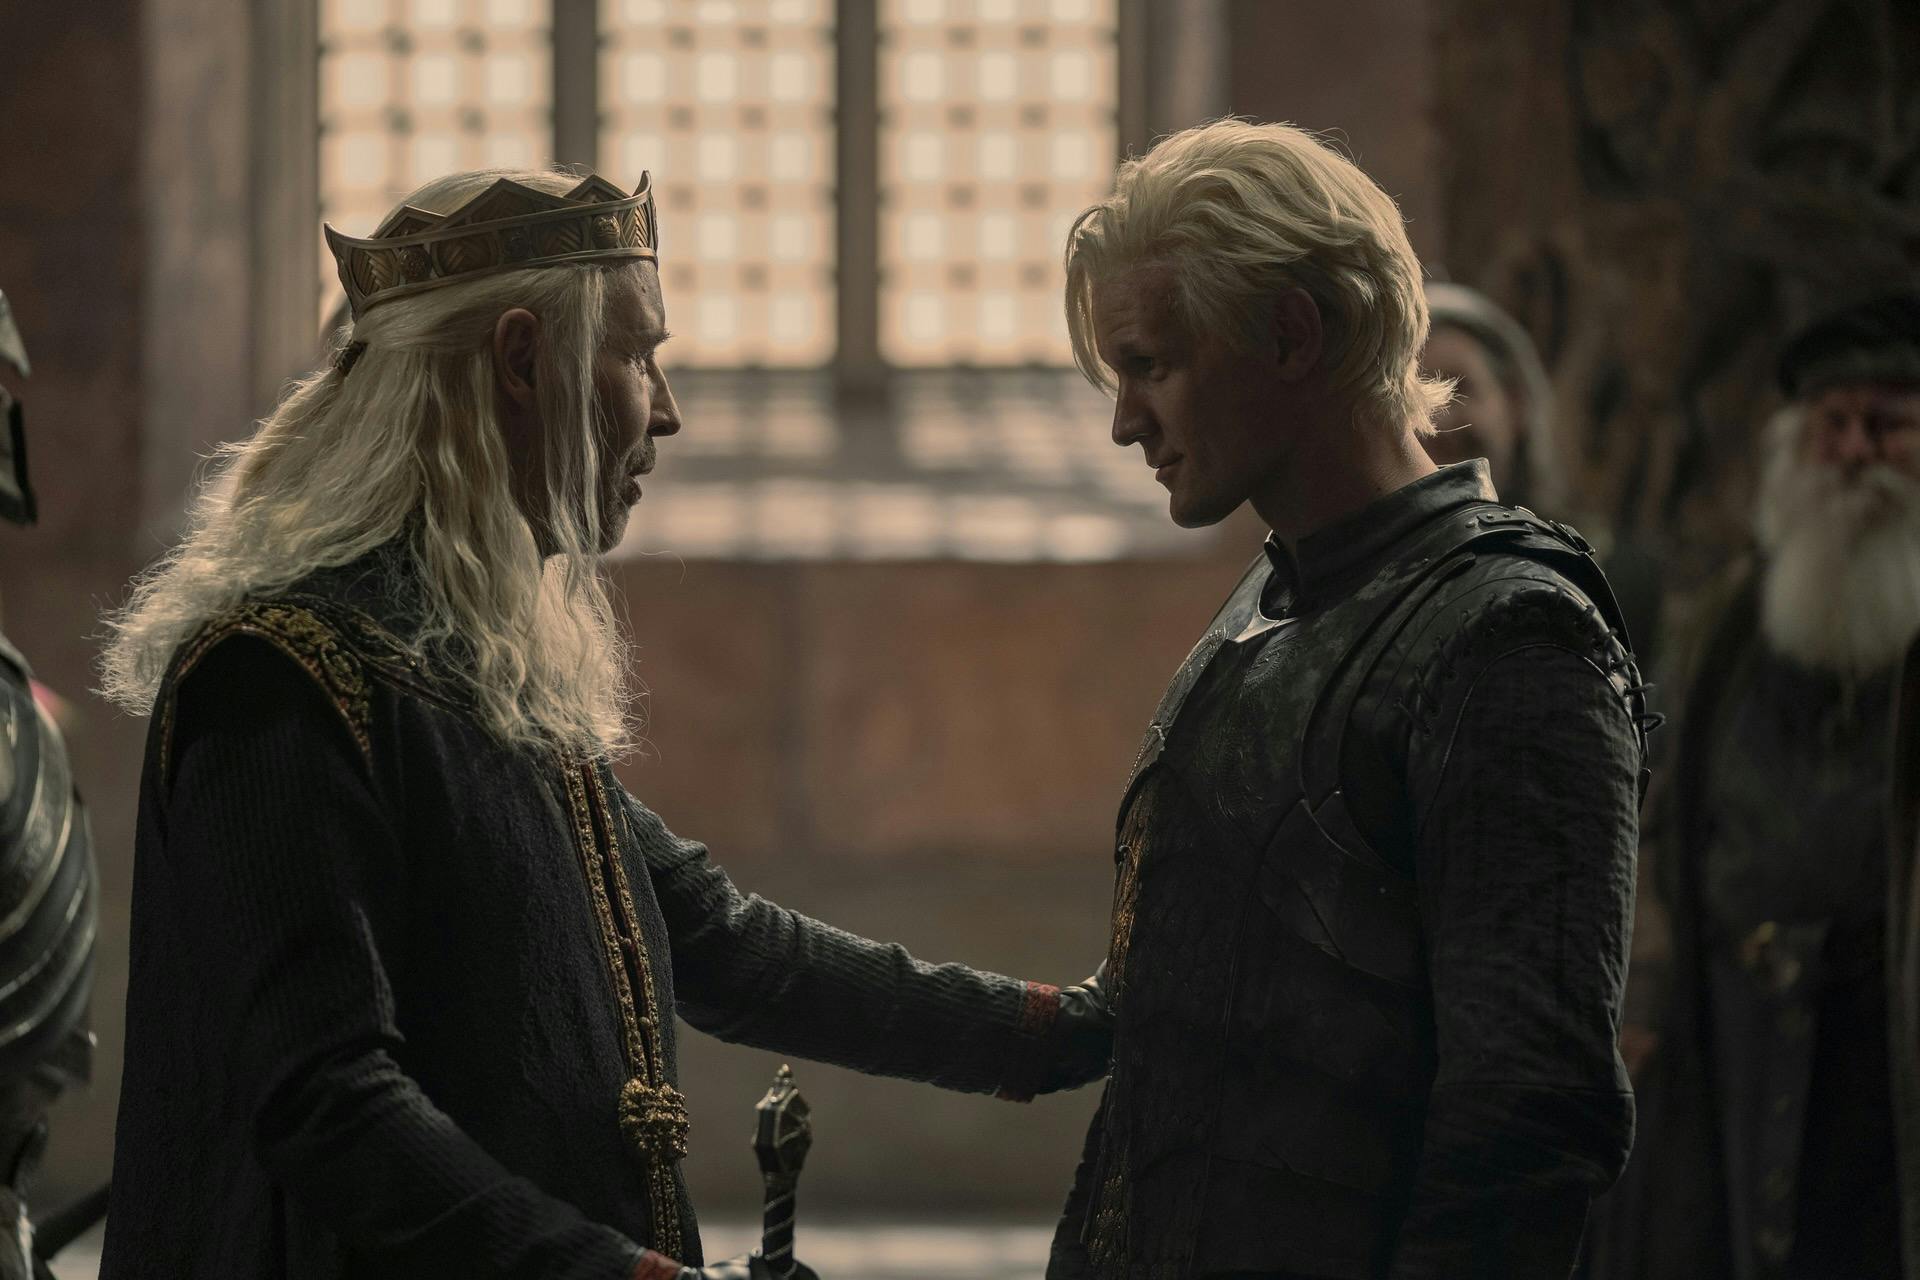 viserys (left) and daemon (right) in house of the dragon